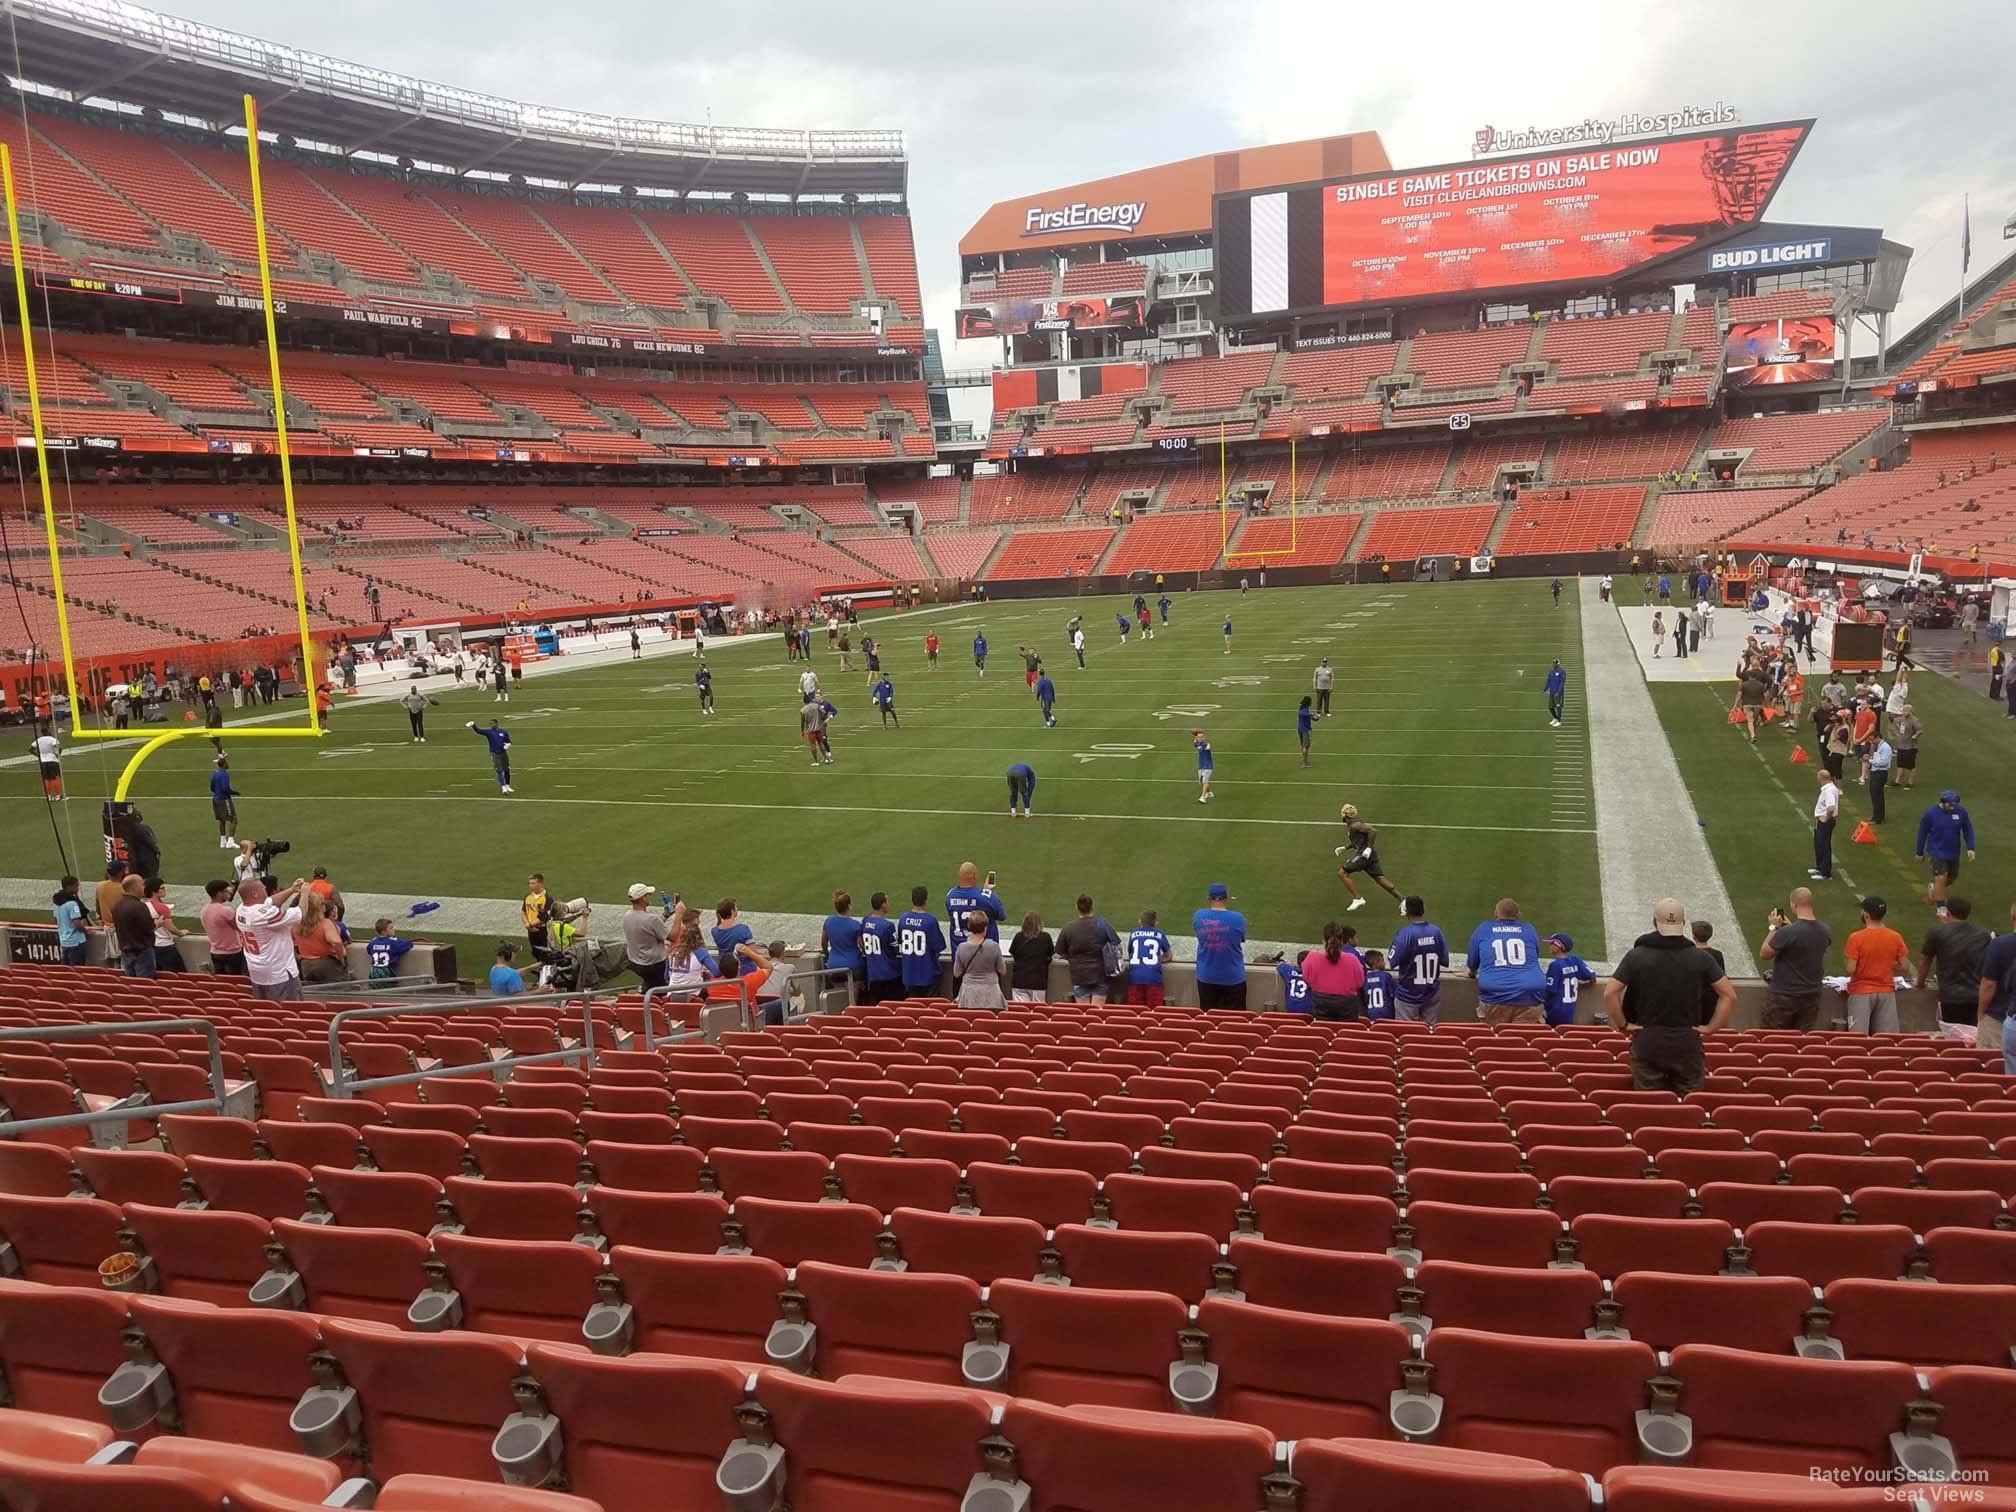 section 149, row 17 seat view  - cleveland browns stadium